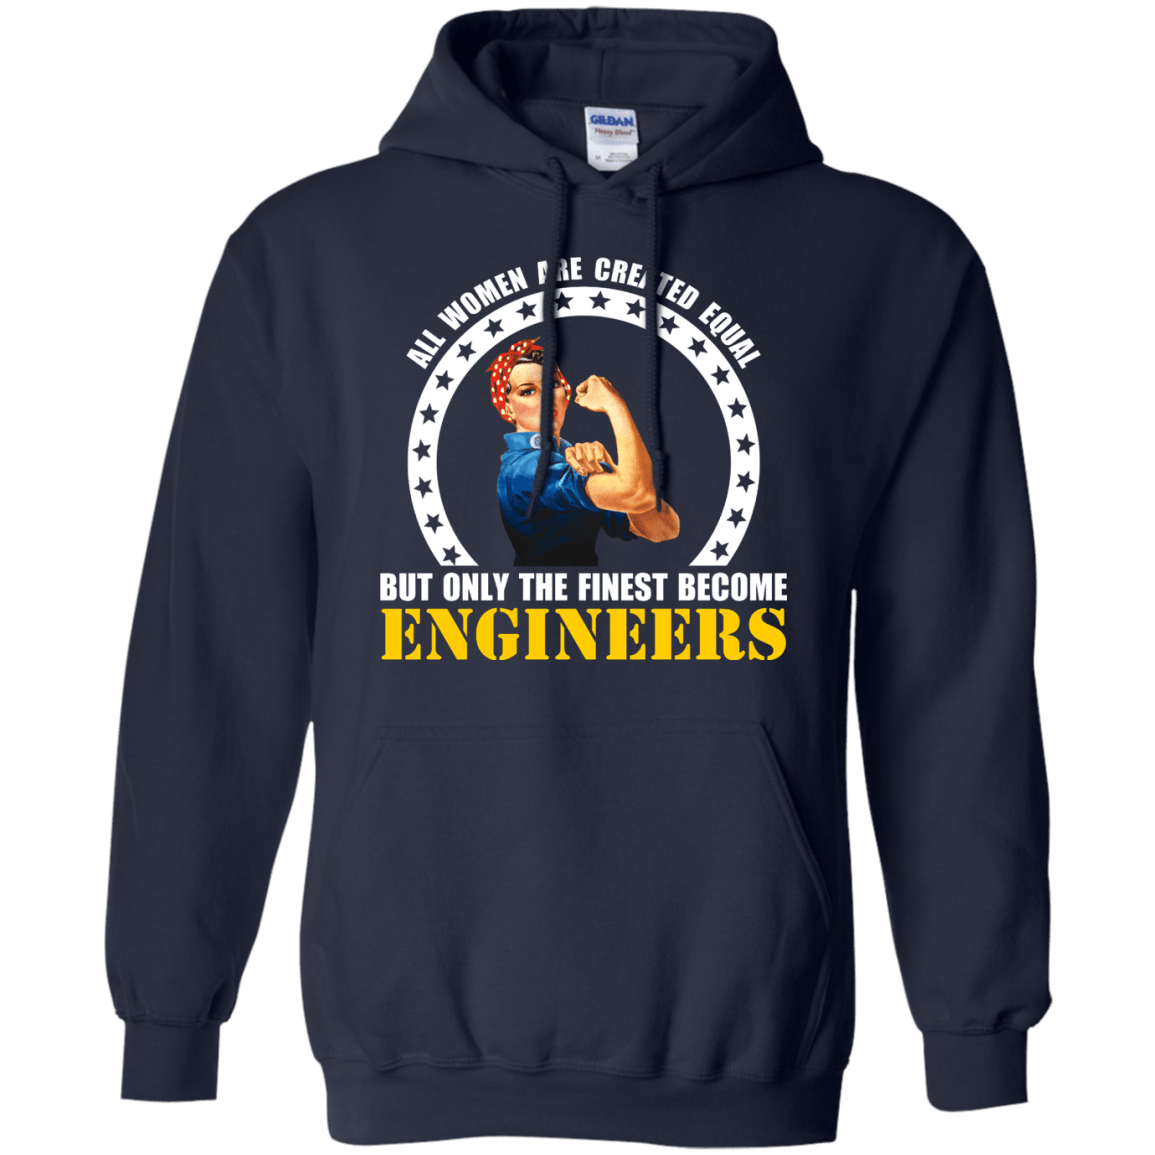 All Women Are Created Equal, But Only The Finest Become Engineers - Engineering Outfitters